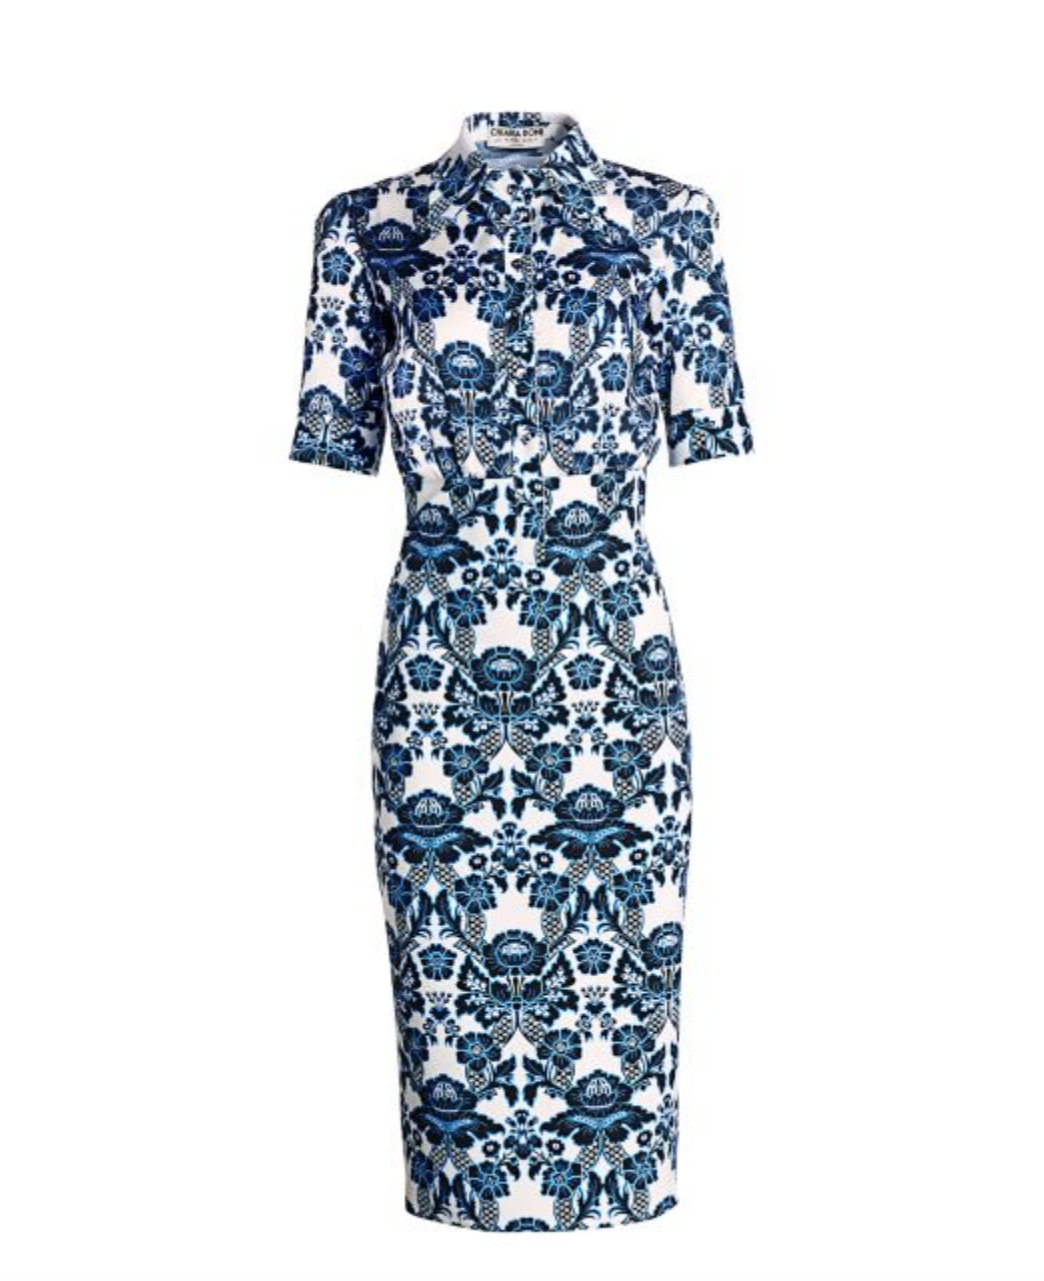 Dolores Catania's Blue Printed Button Down Dress